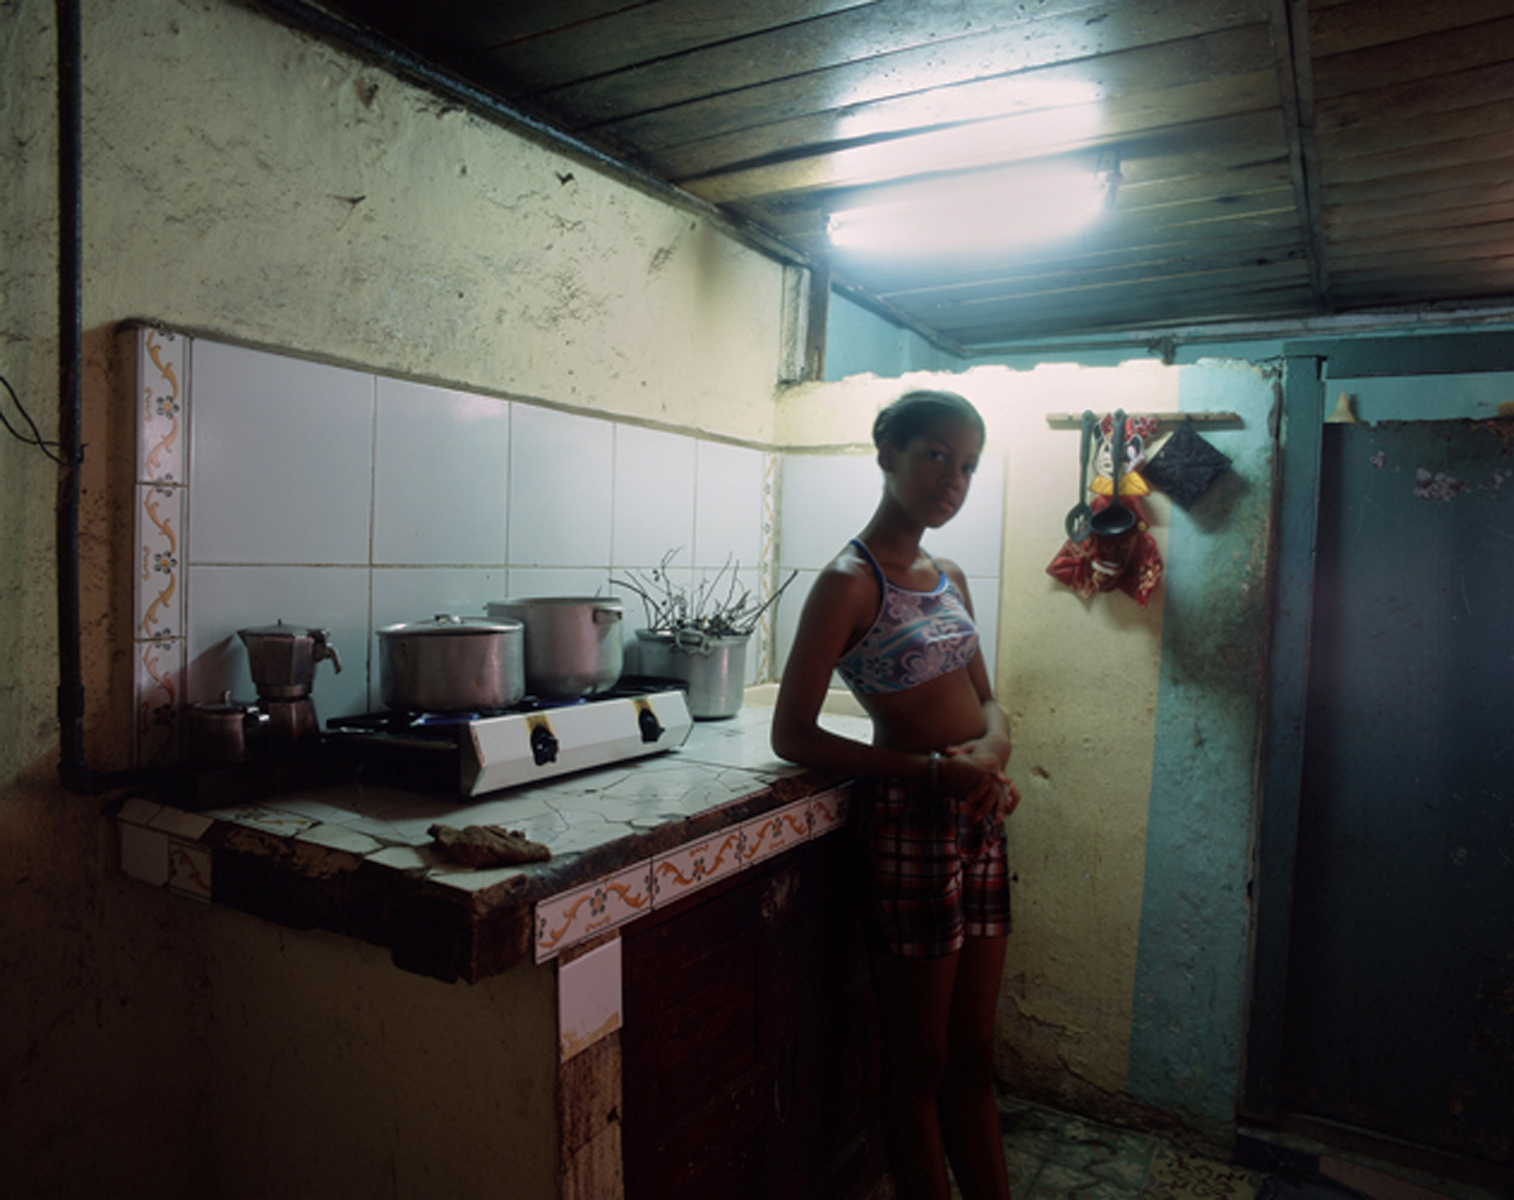 Nazarena, prepares dinner,--chicken, rice, and black beans--in a makeshift kitchen, with dripping water, a hotplate, and two pots. Despite her stark surroundings and limited resources, she is always smiling and listening to music whiling preparing a feast. Havana, Cuba